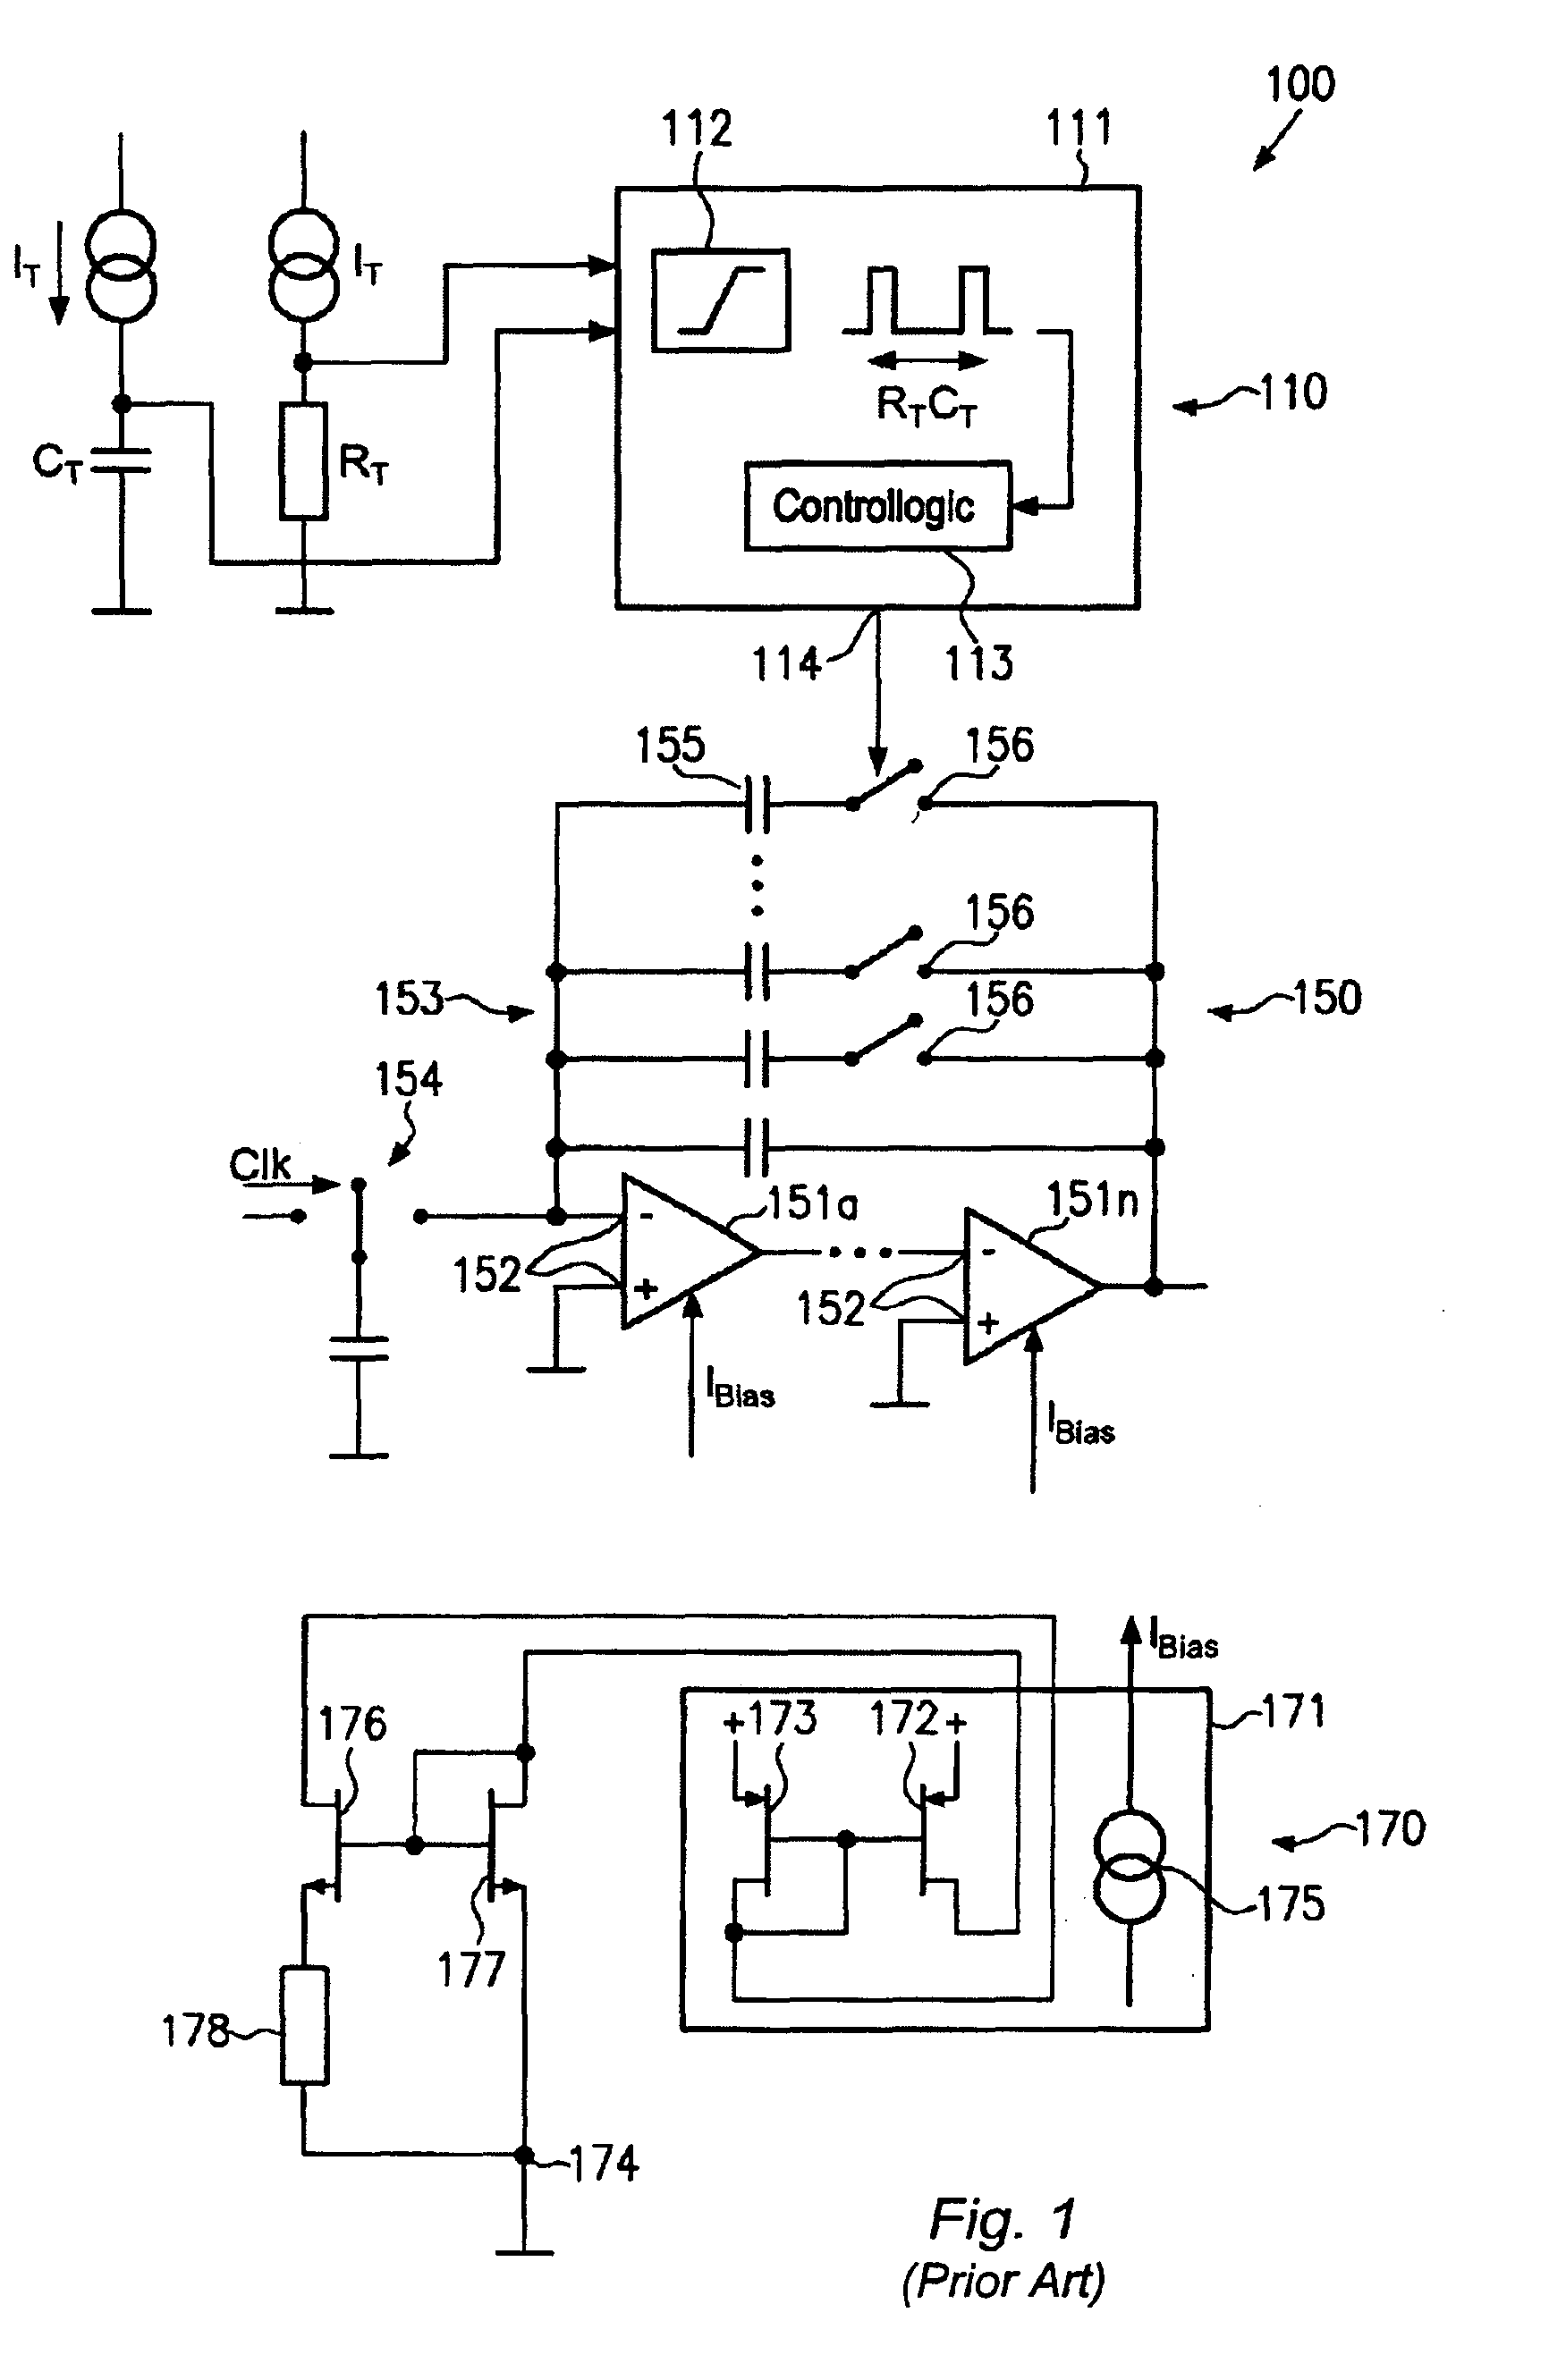 Circuit and a method for controlling the bias current in a switched capacitor circuit